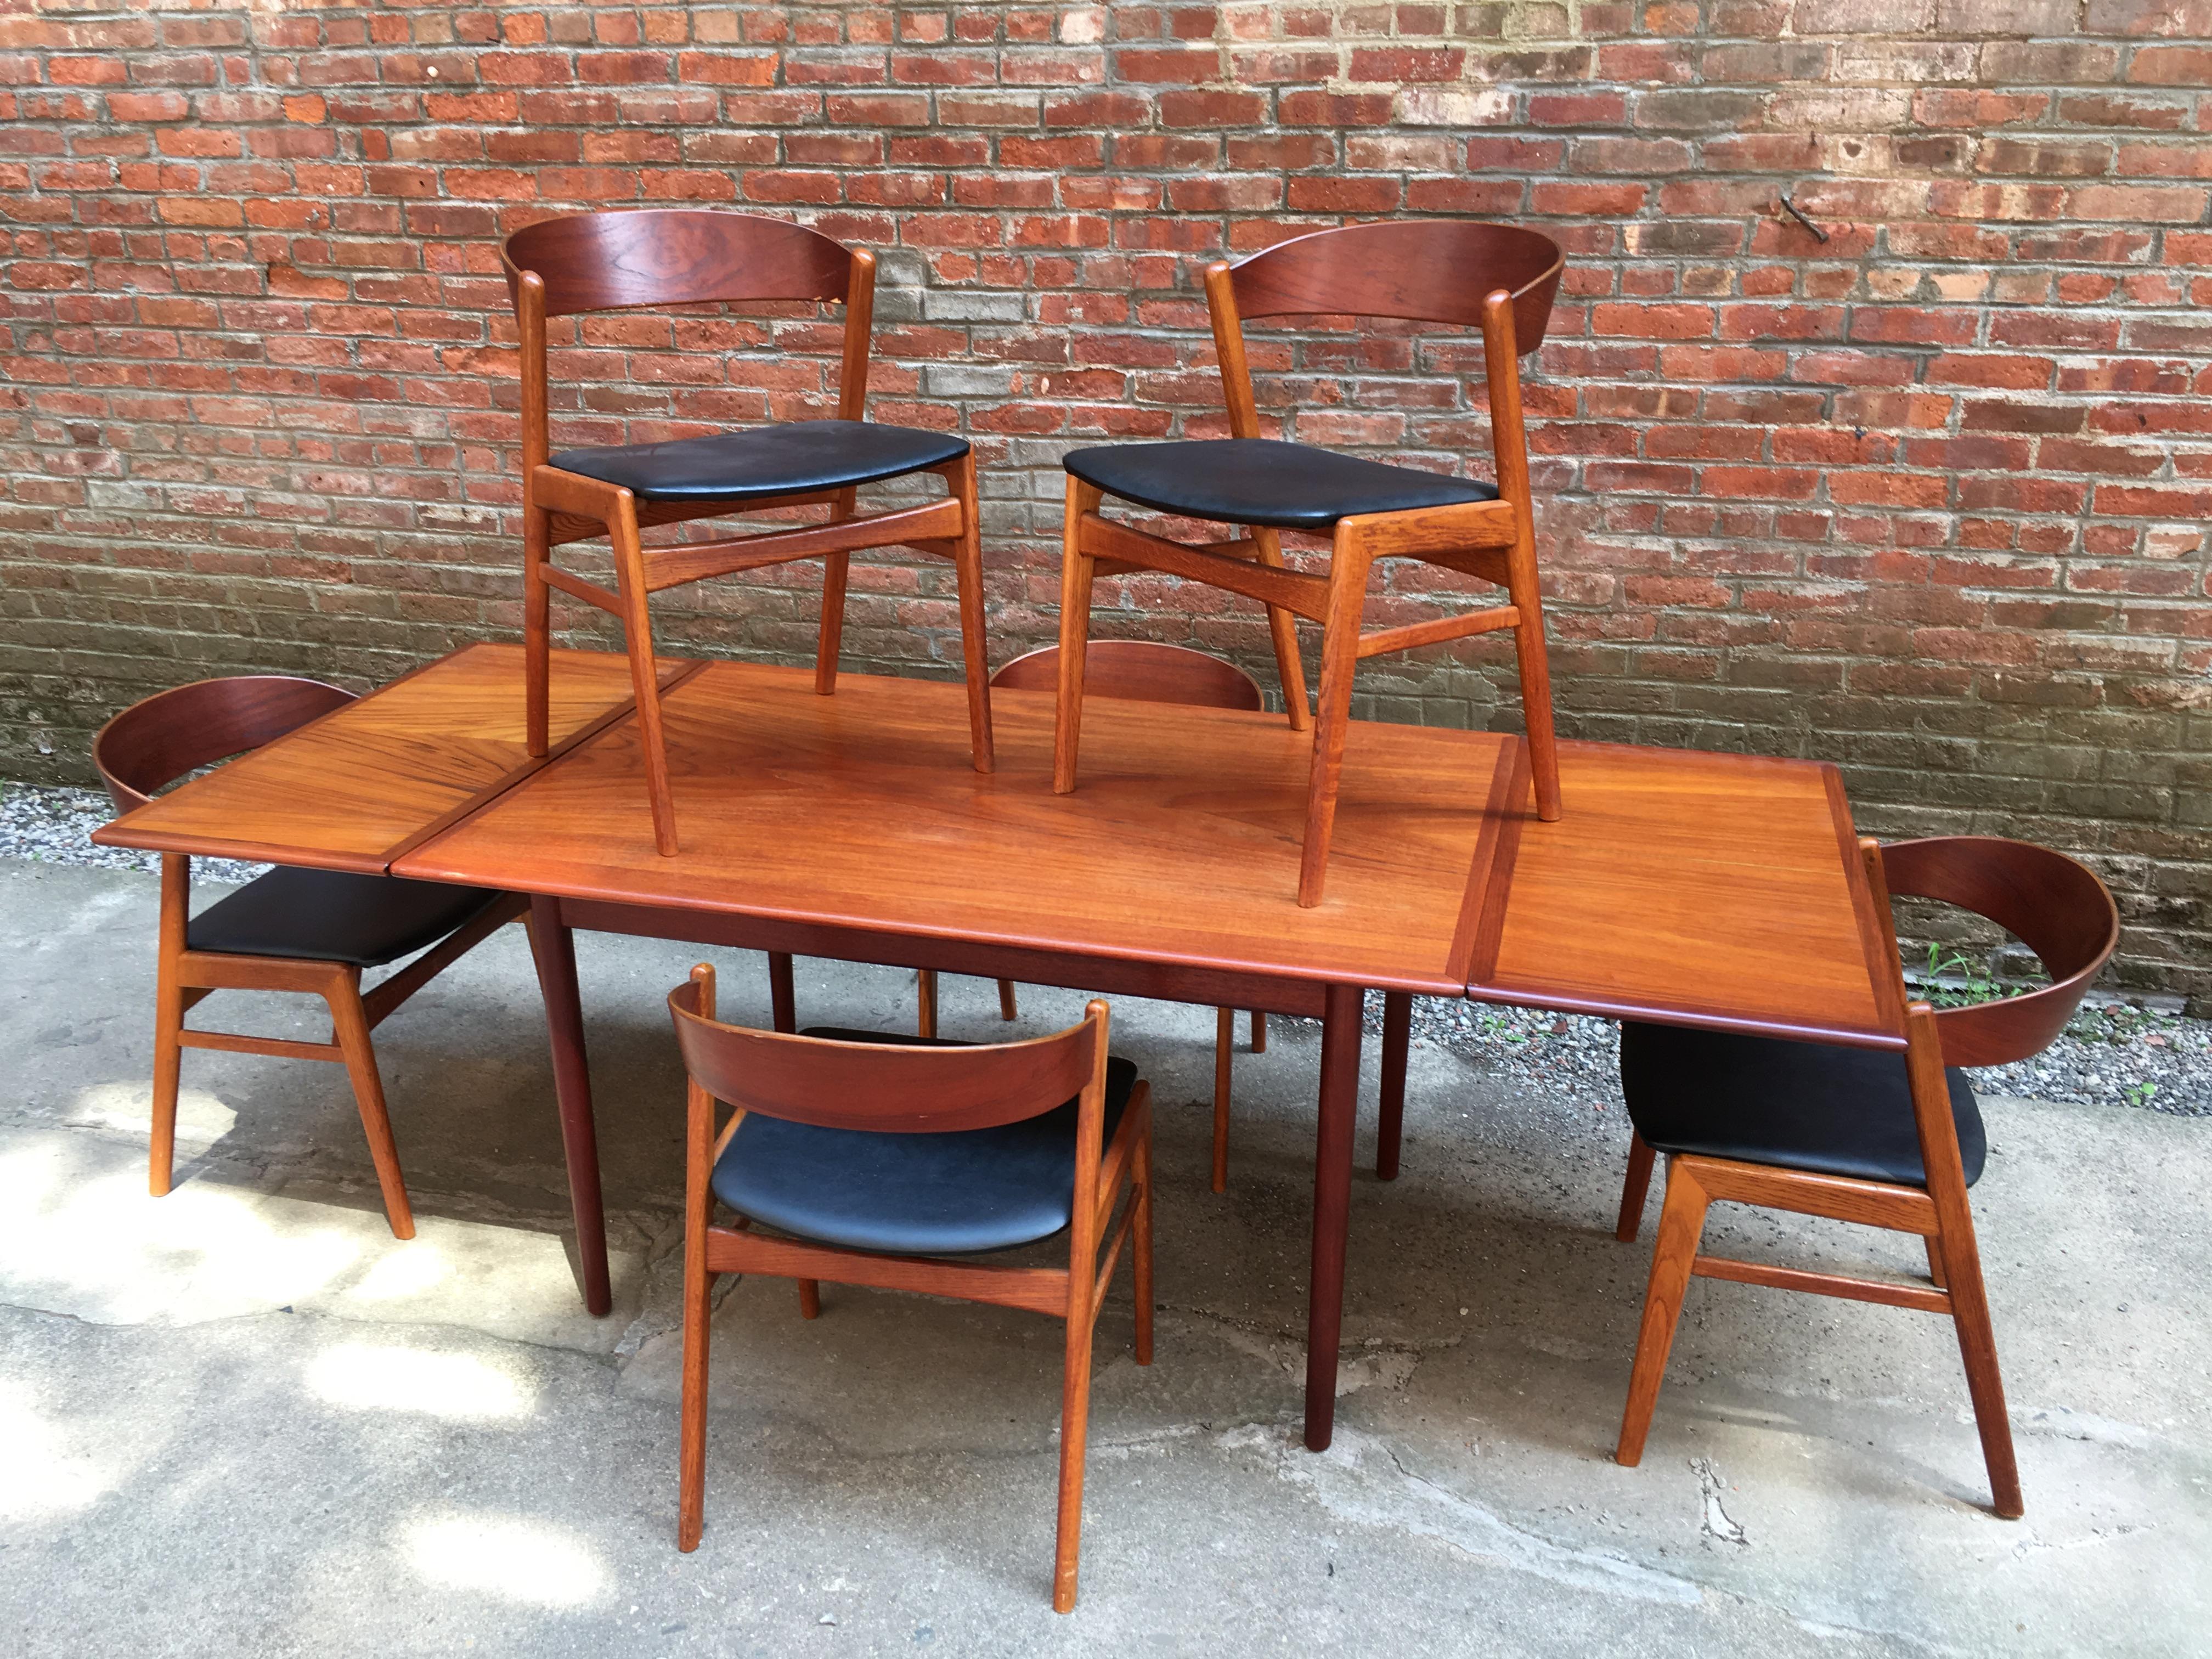 Spectacular set of six DUX Ribbon Back chairs constructed of teak veneer, solid oak and black vinyl seats. Beautifully shaped backs for complete comfort.

The chairs measure 20